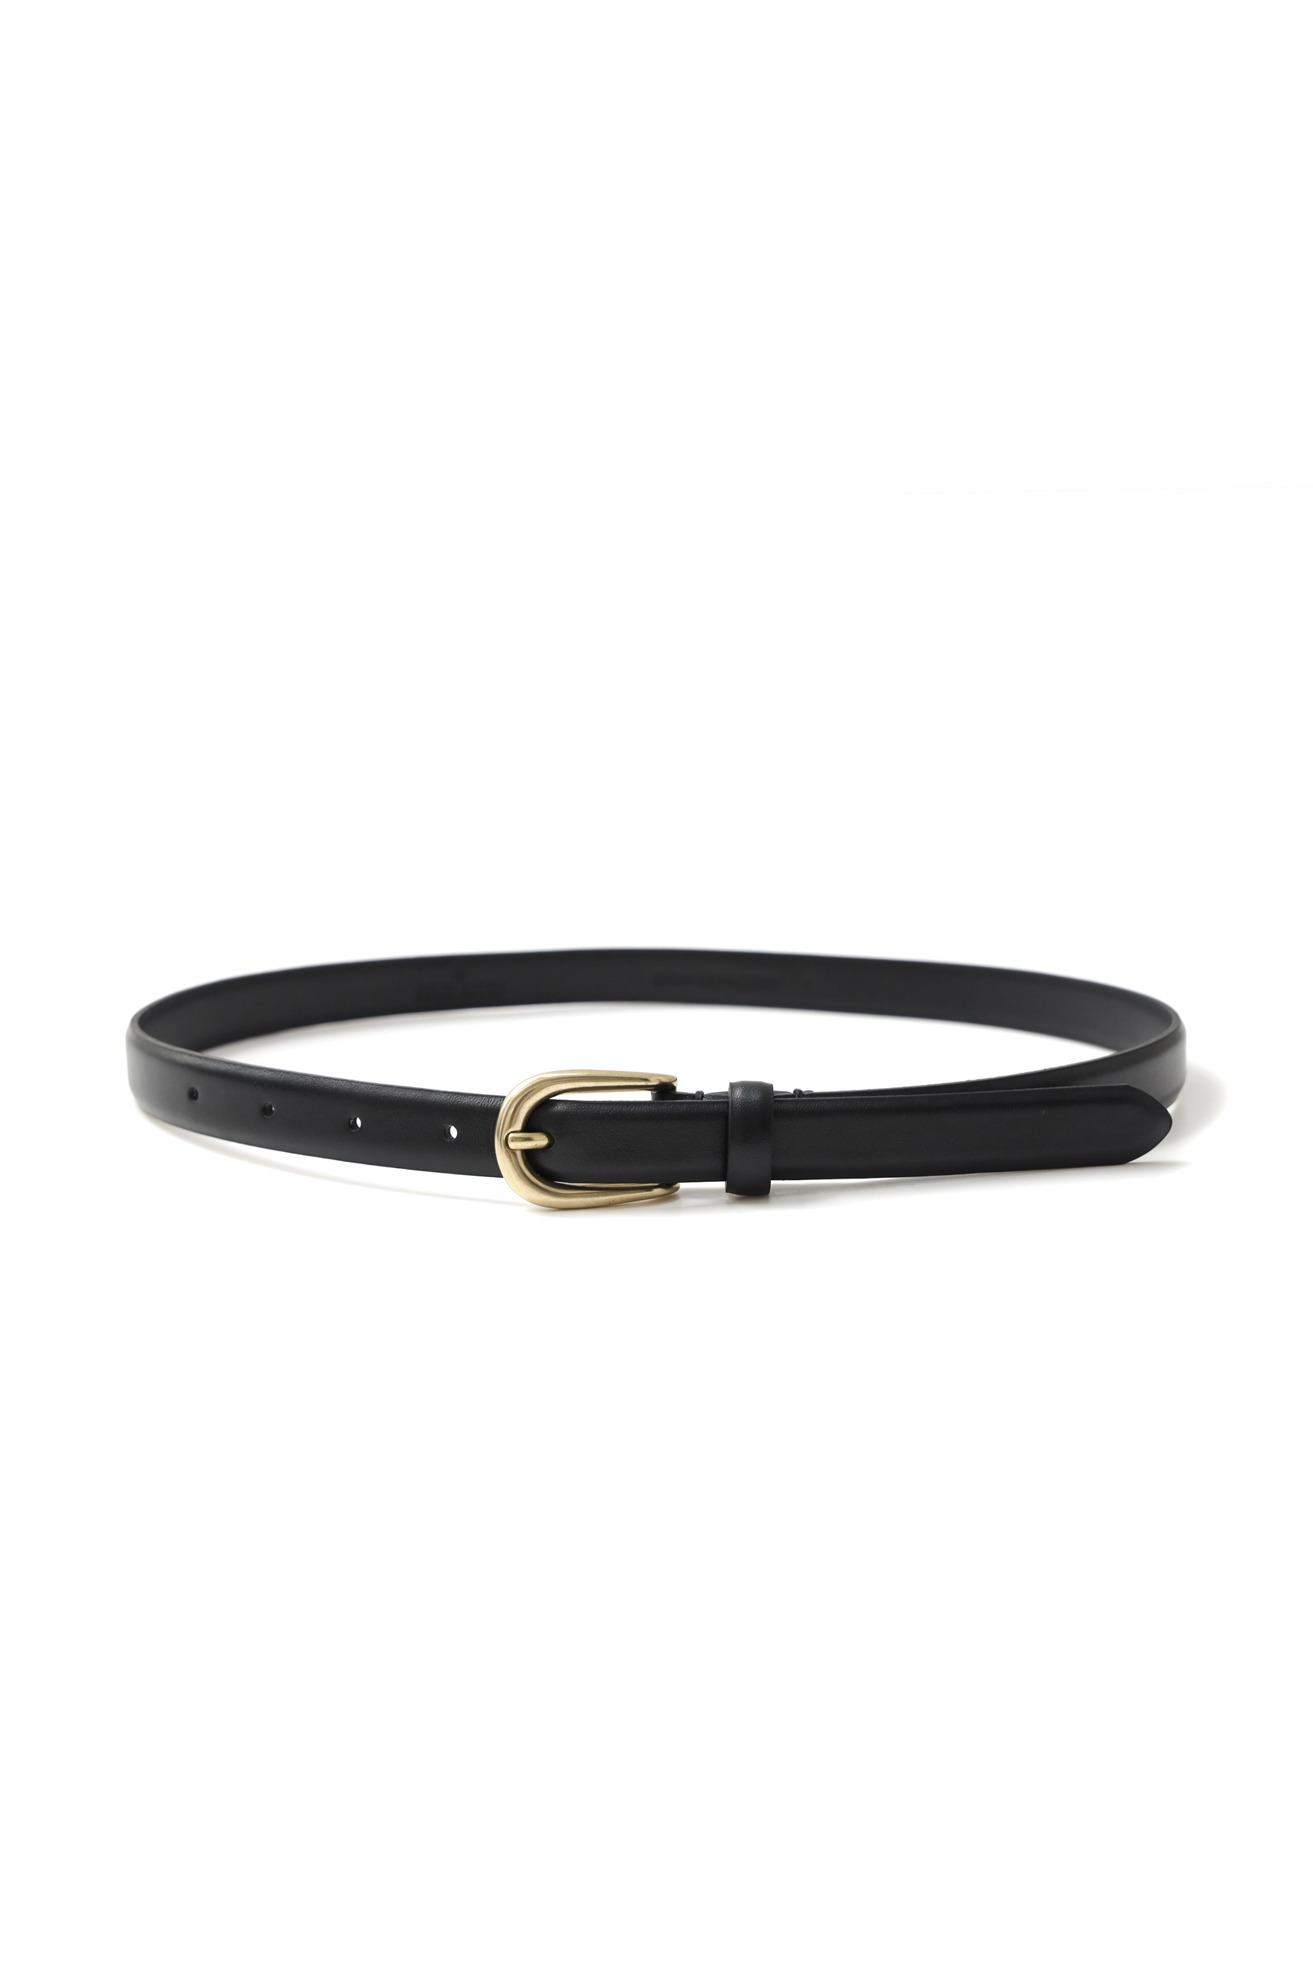 Italy Brass Leather Belt  (GOLD)   ATELIER EDITION 